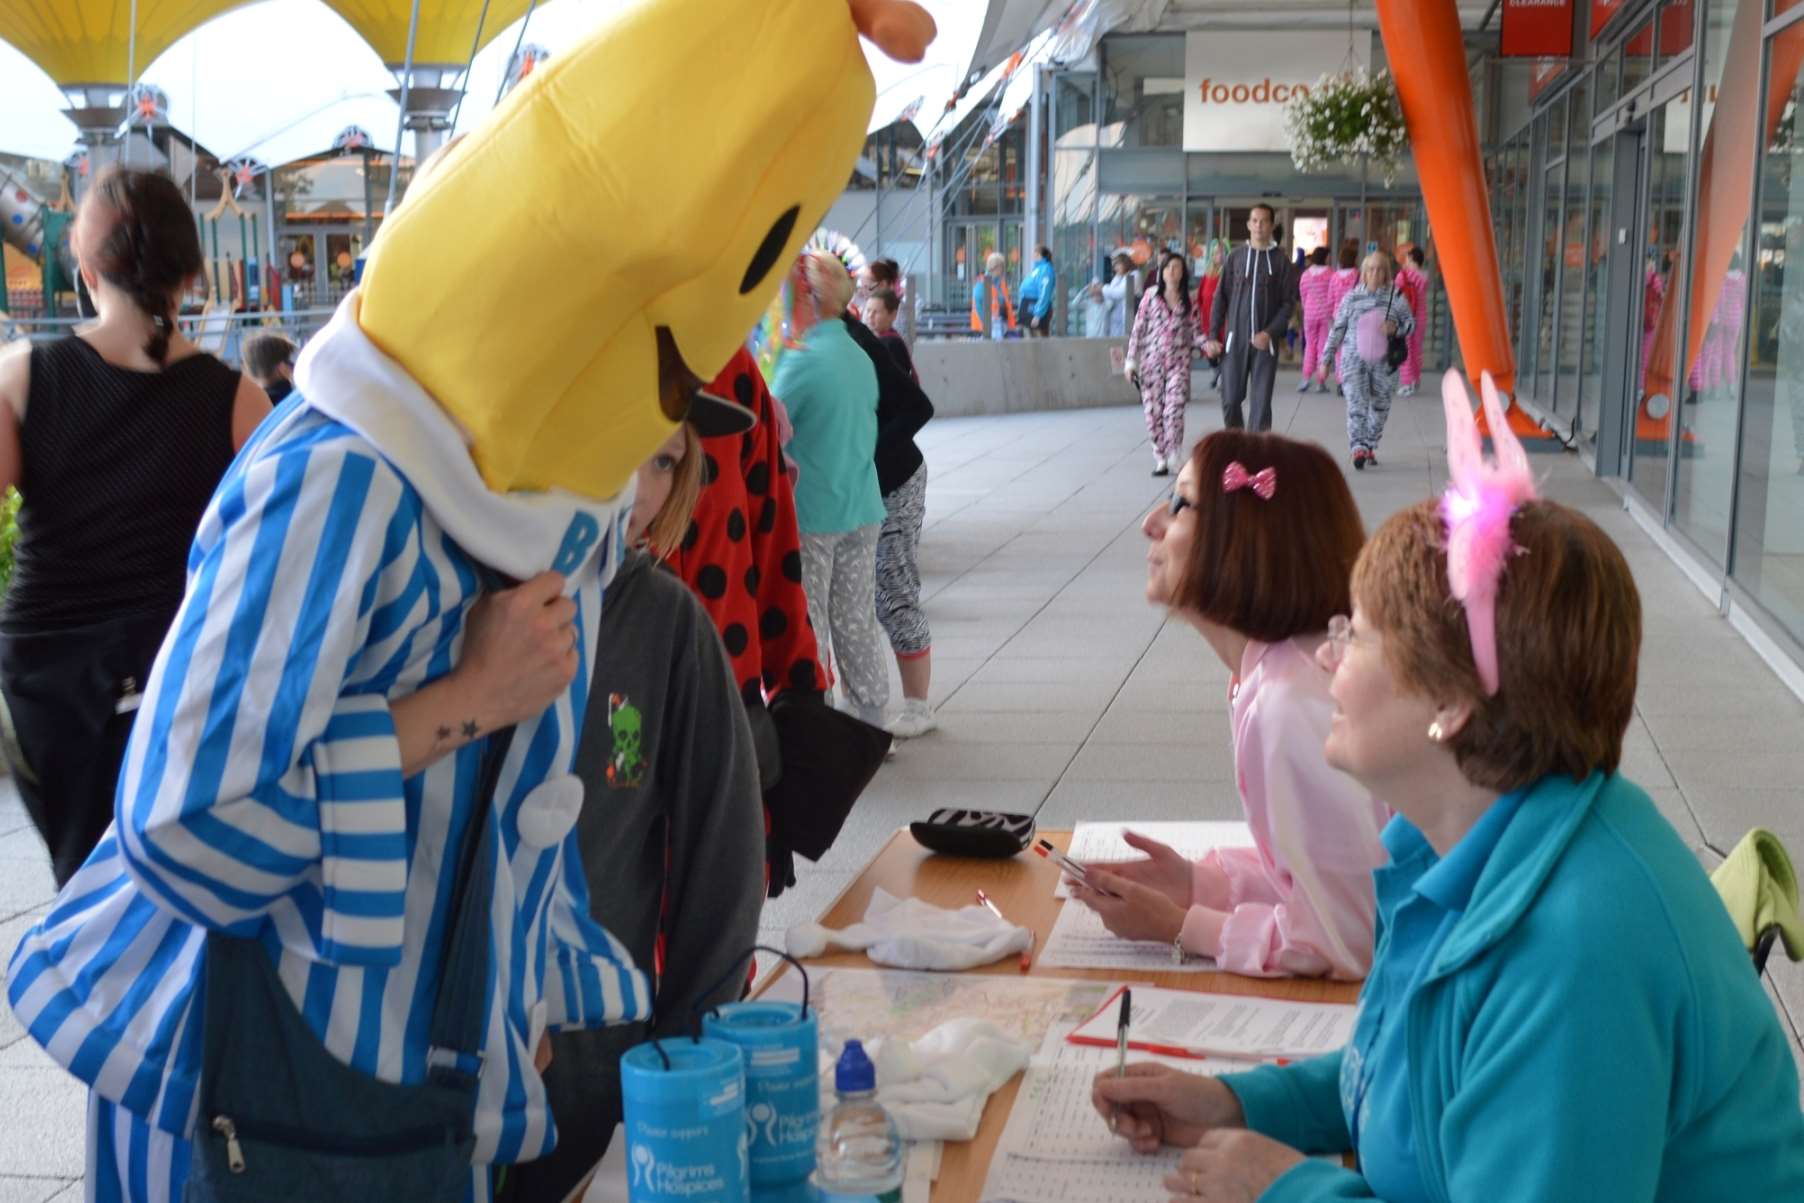 A banana (in pyjamas) signing up for last year's event